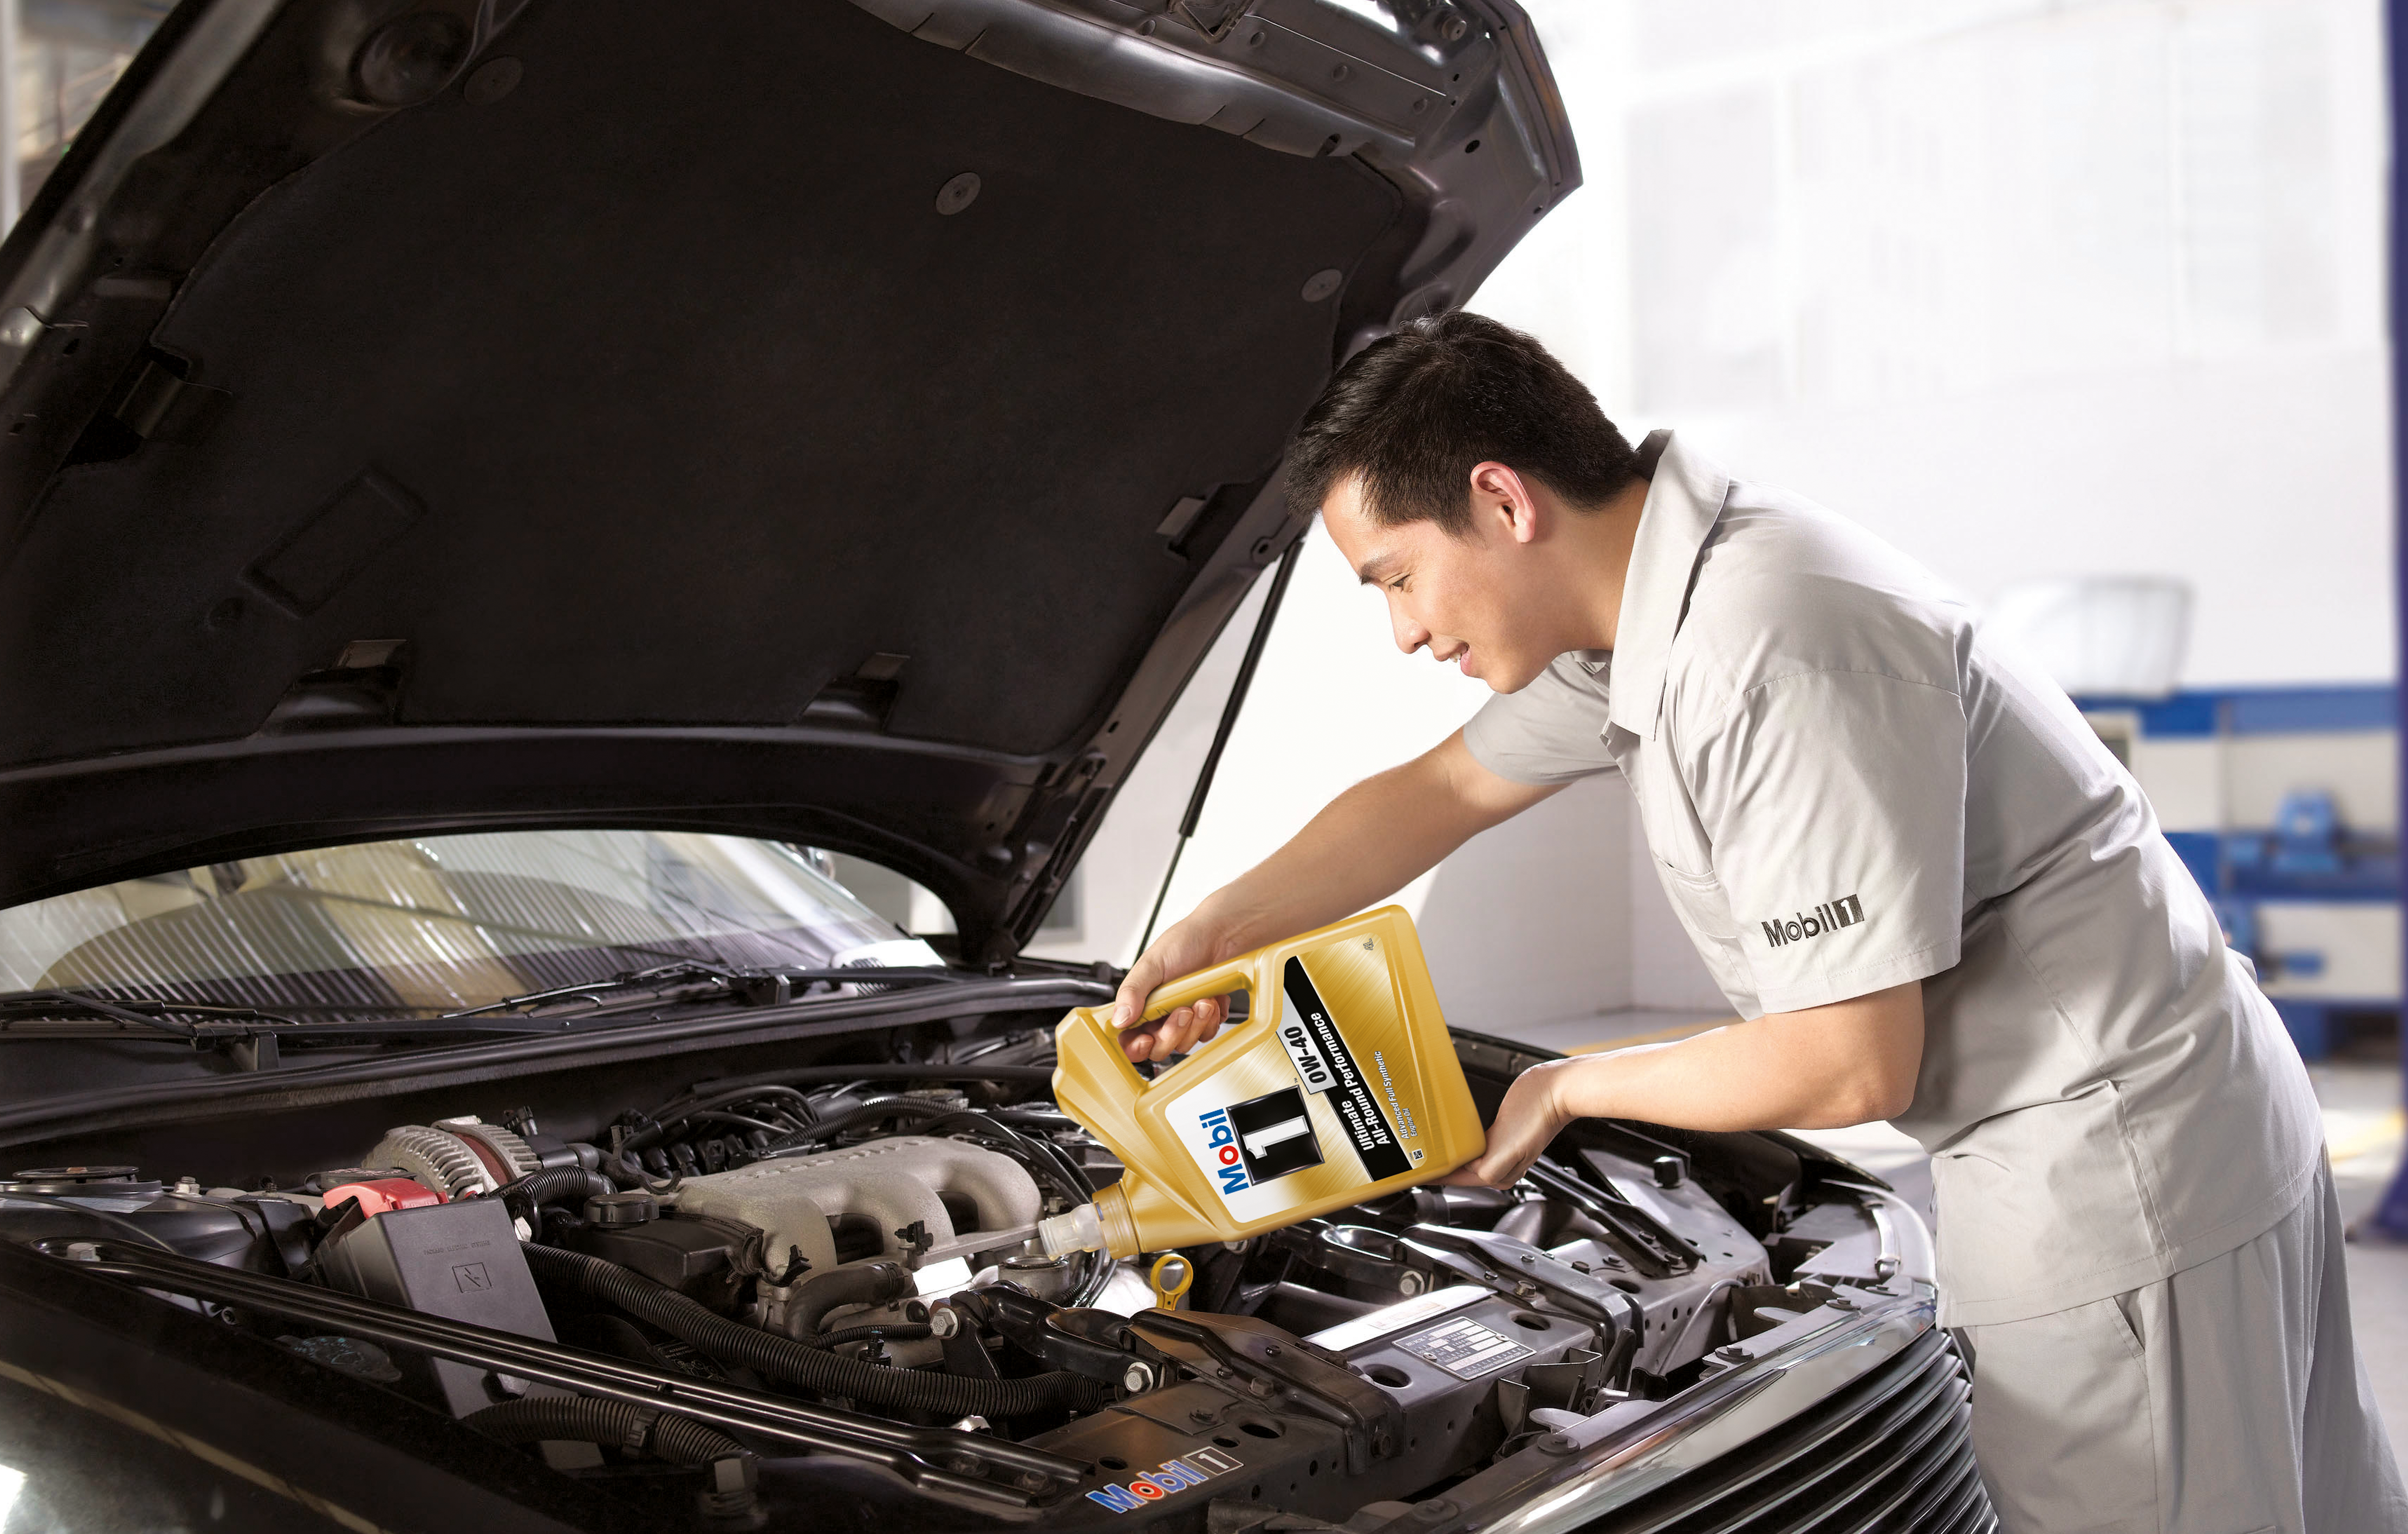 Engine oil 101 - Choosing the right oil for your car